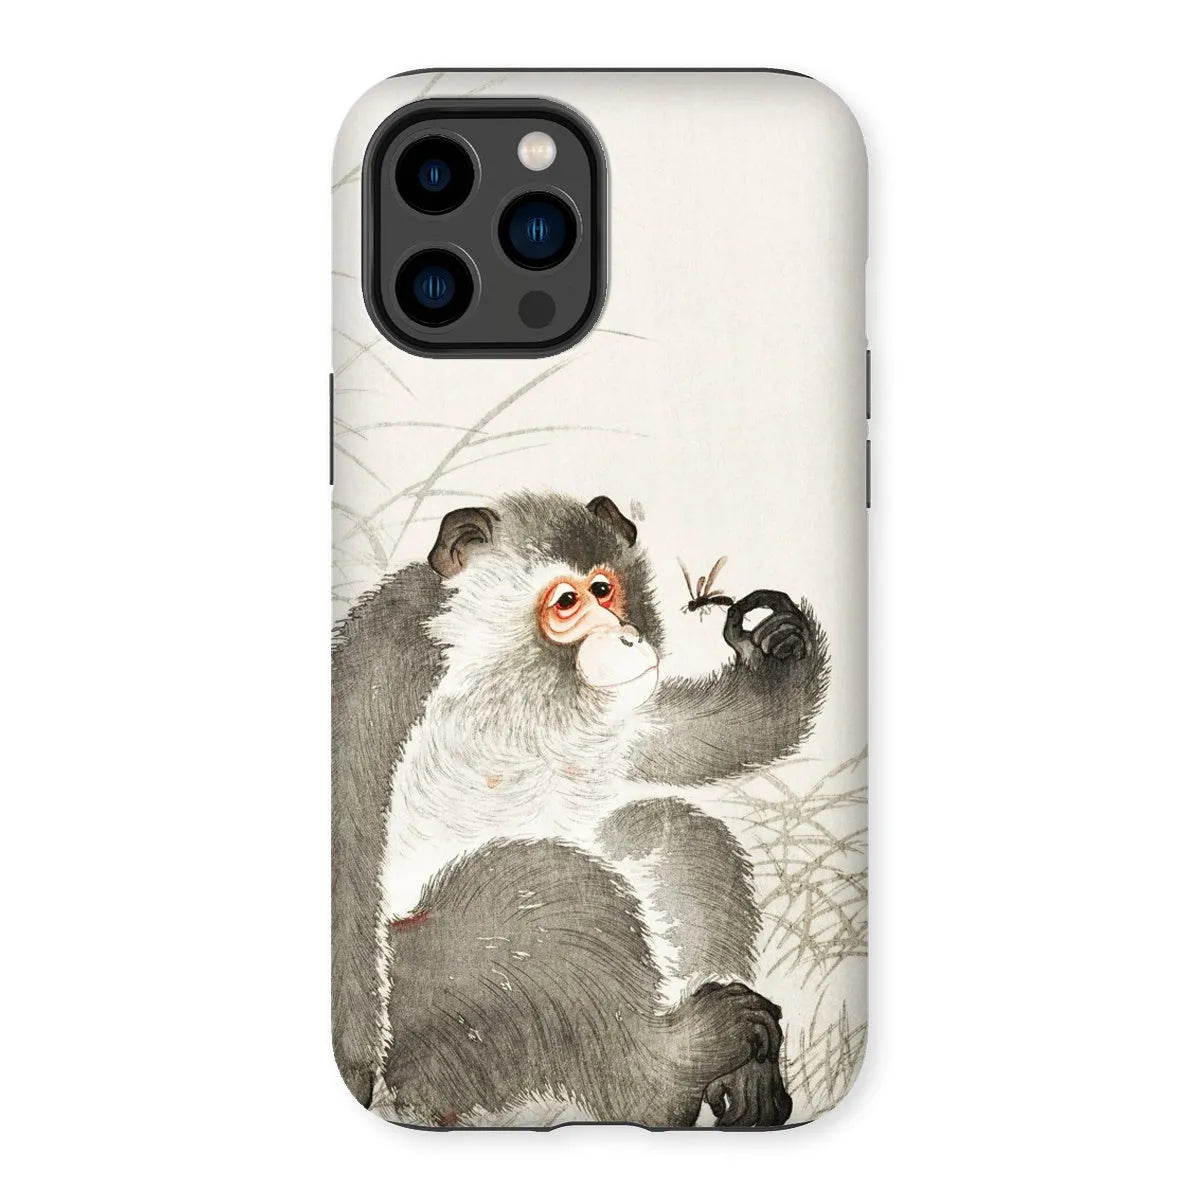 Monkey With Insect - Shin-hanga Art Phone Case - Ohara Koson - Iphone 14 Pro Max / Matte - Mobile Phone Cases